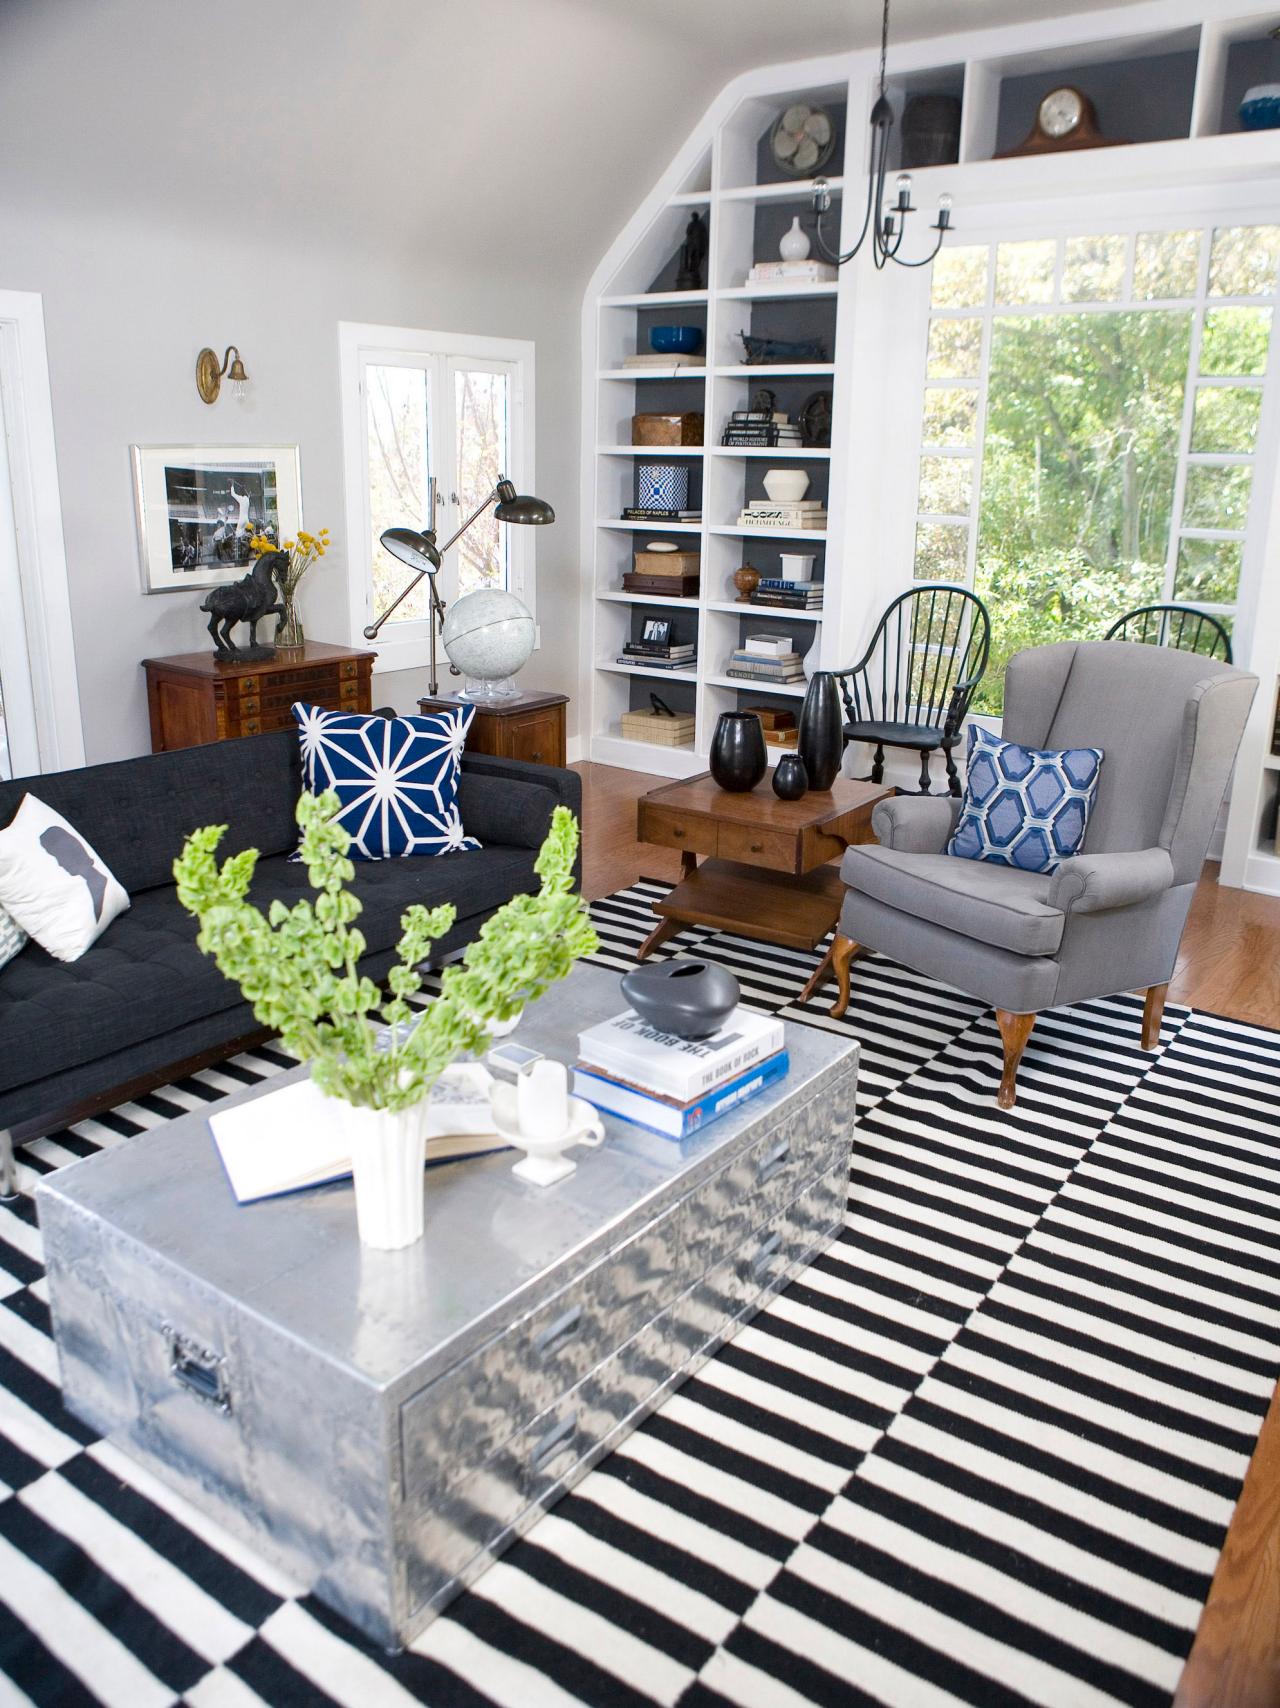 Modern Living Room With Black and White Striped Rug | HGTV